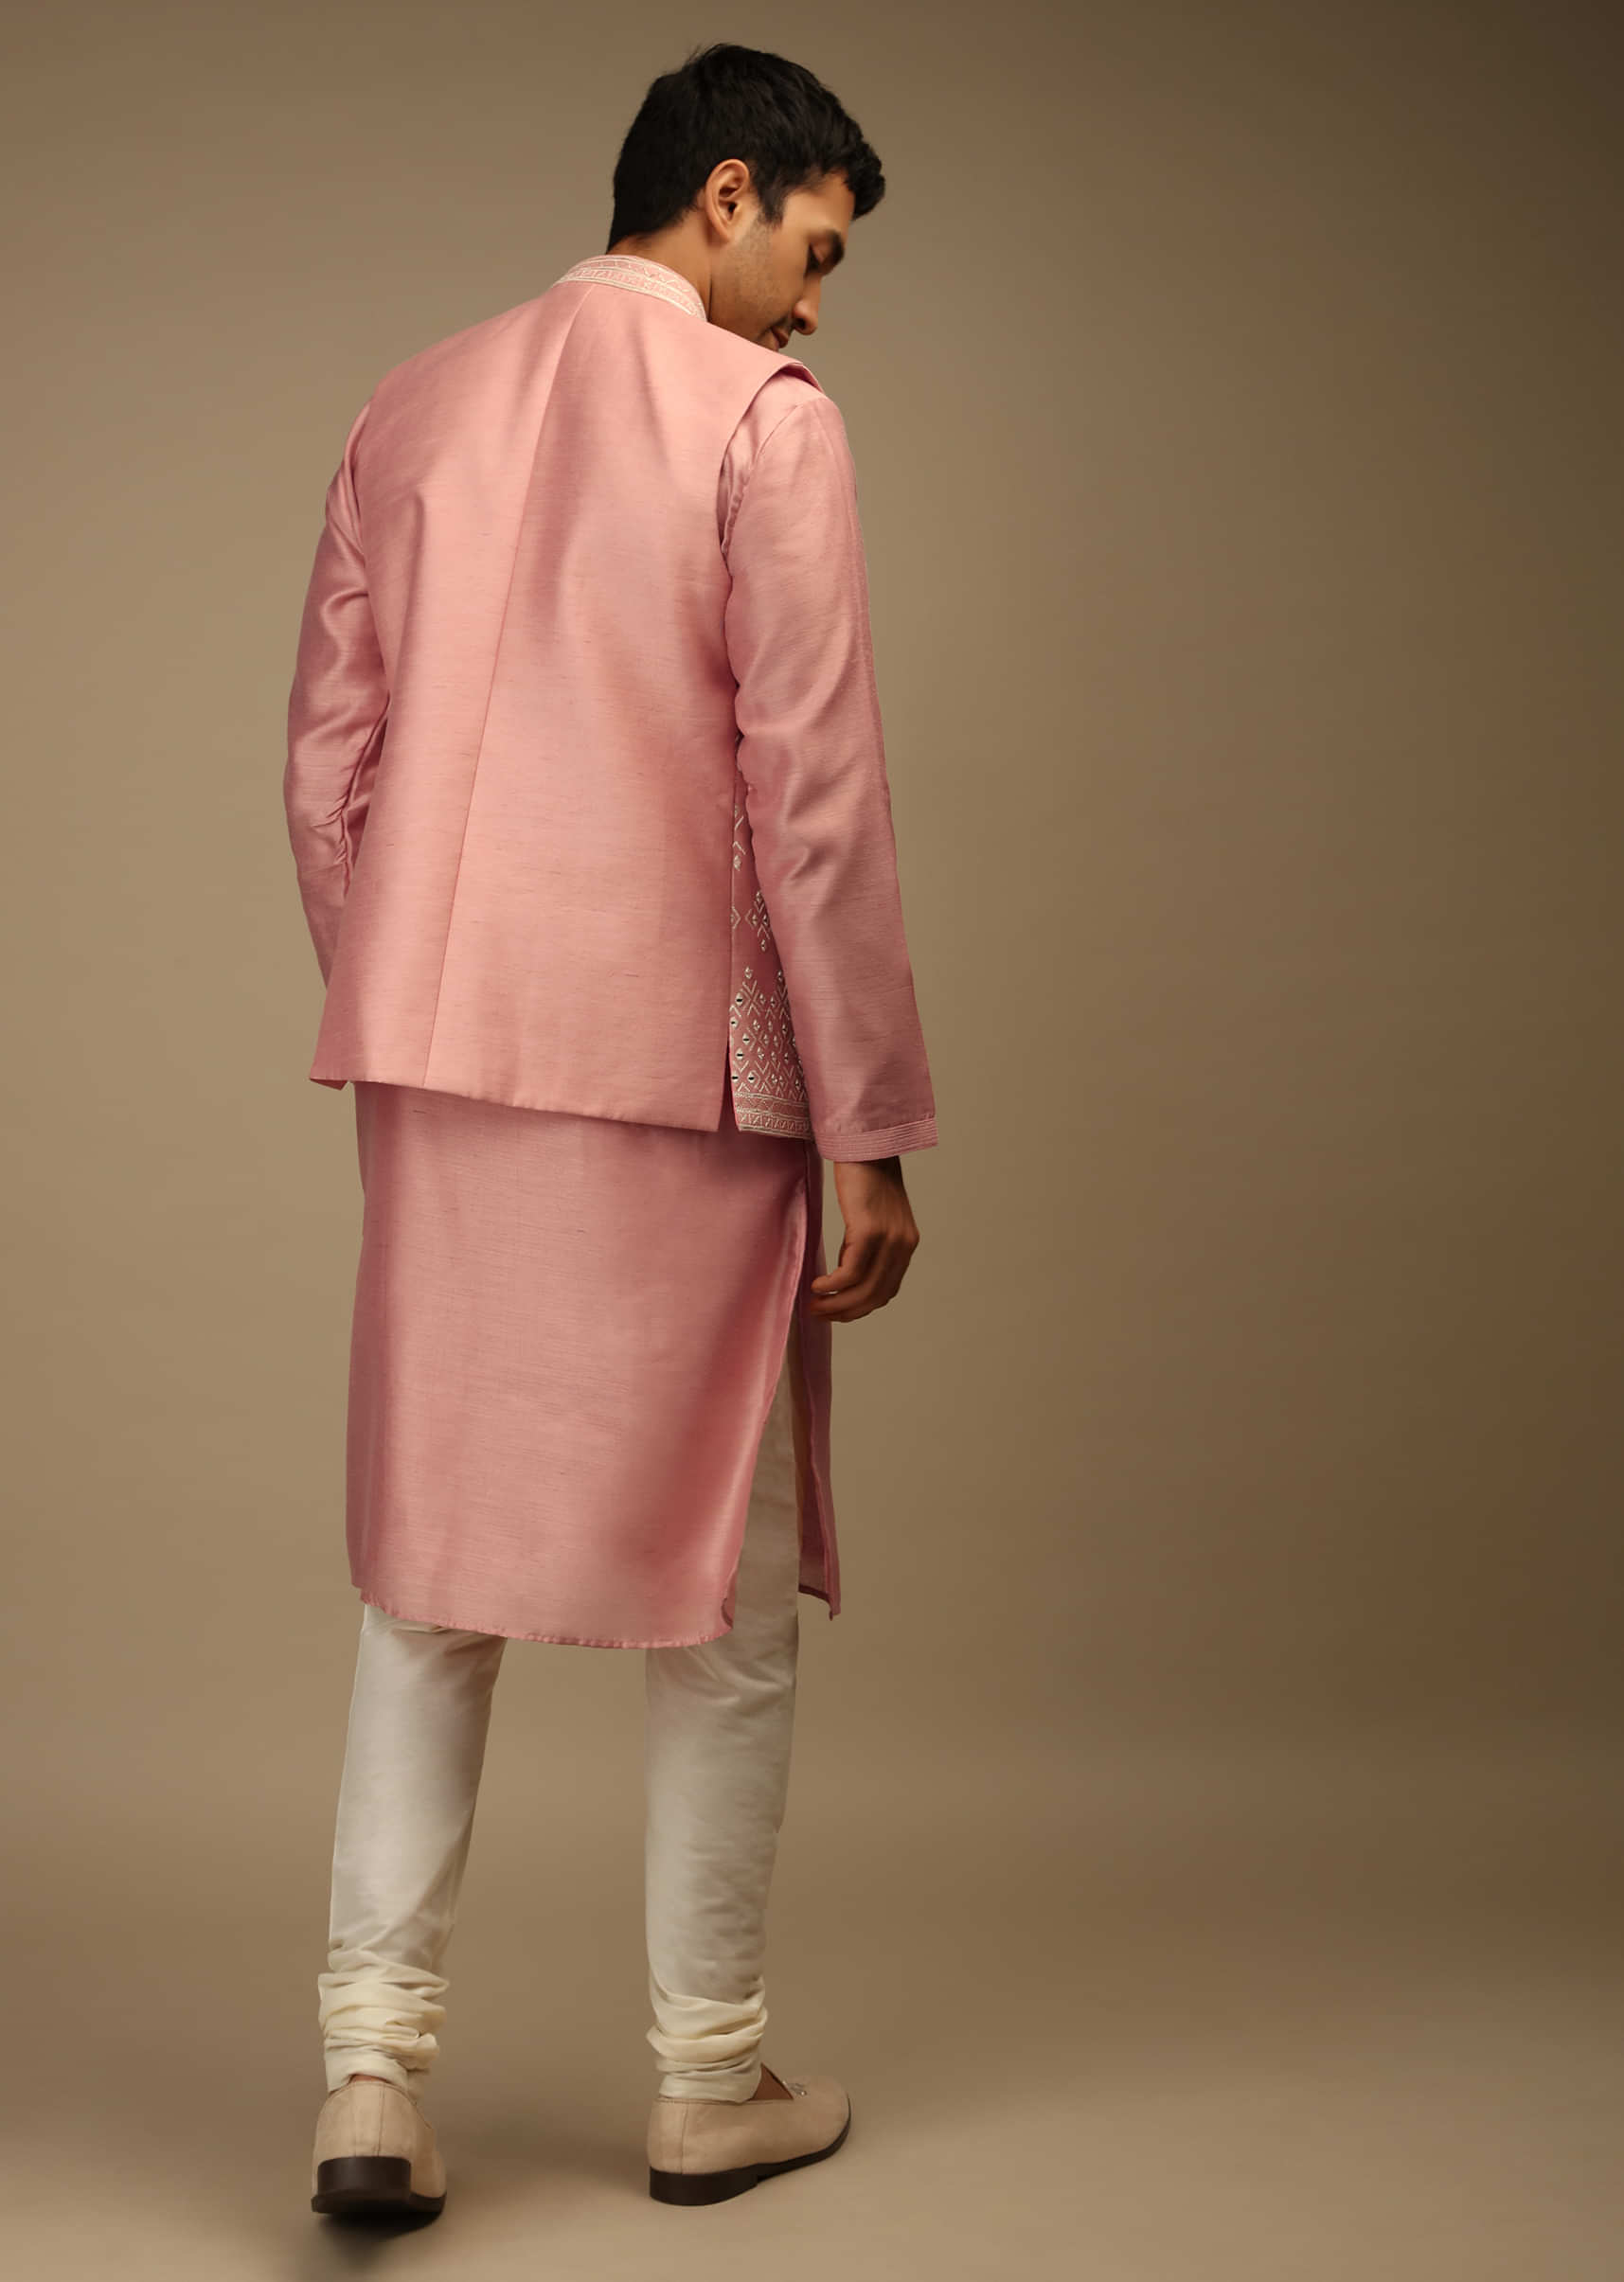 Rose Pink Nehru Jacket And Kurta Set In Tussar Silk With Resham And Sequins Abla Embroidered Geometric Design